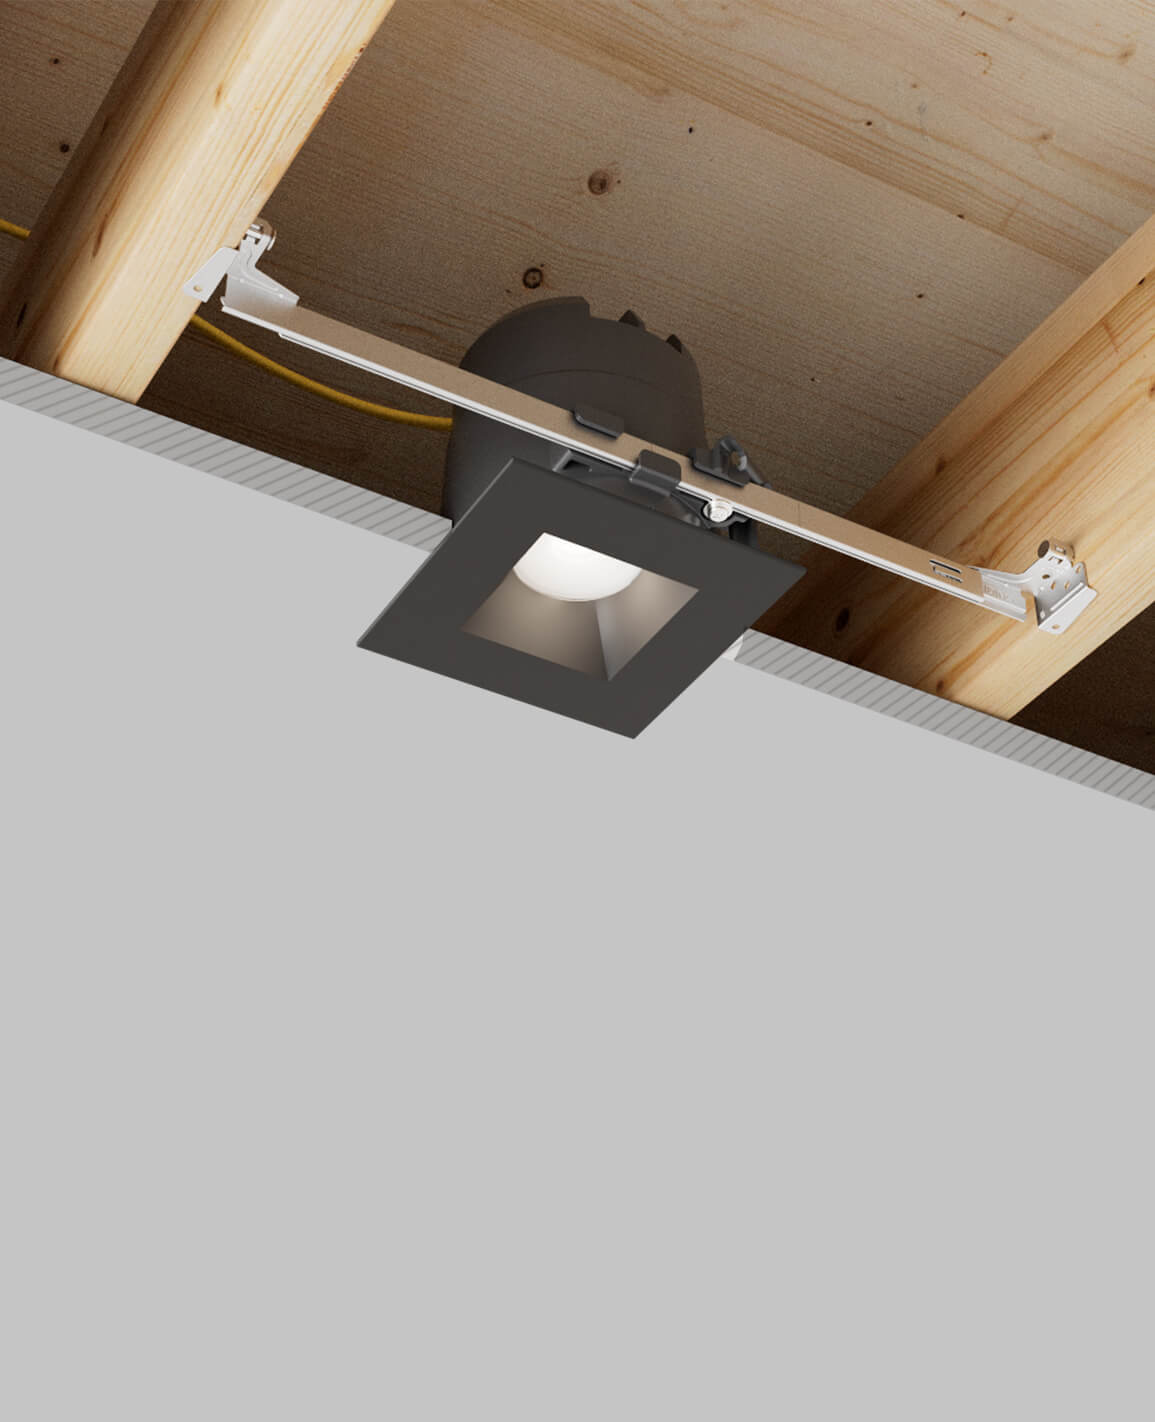 LUSA 4" recessed light with bar hangers housing and square black trim